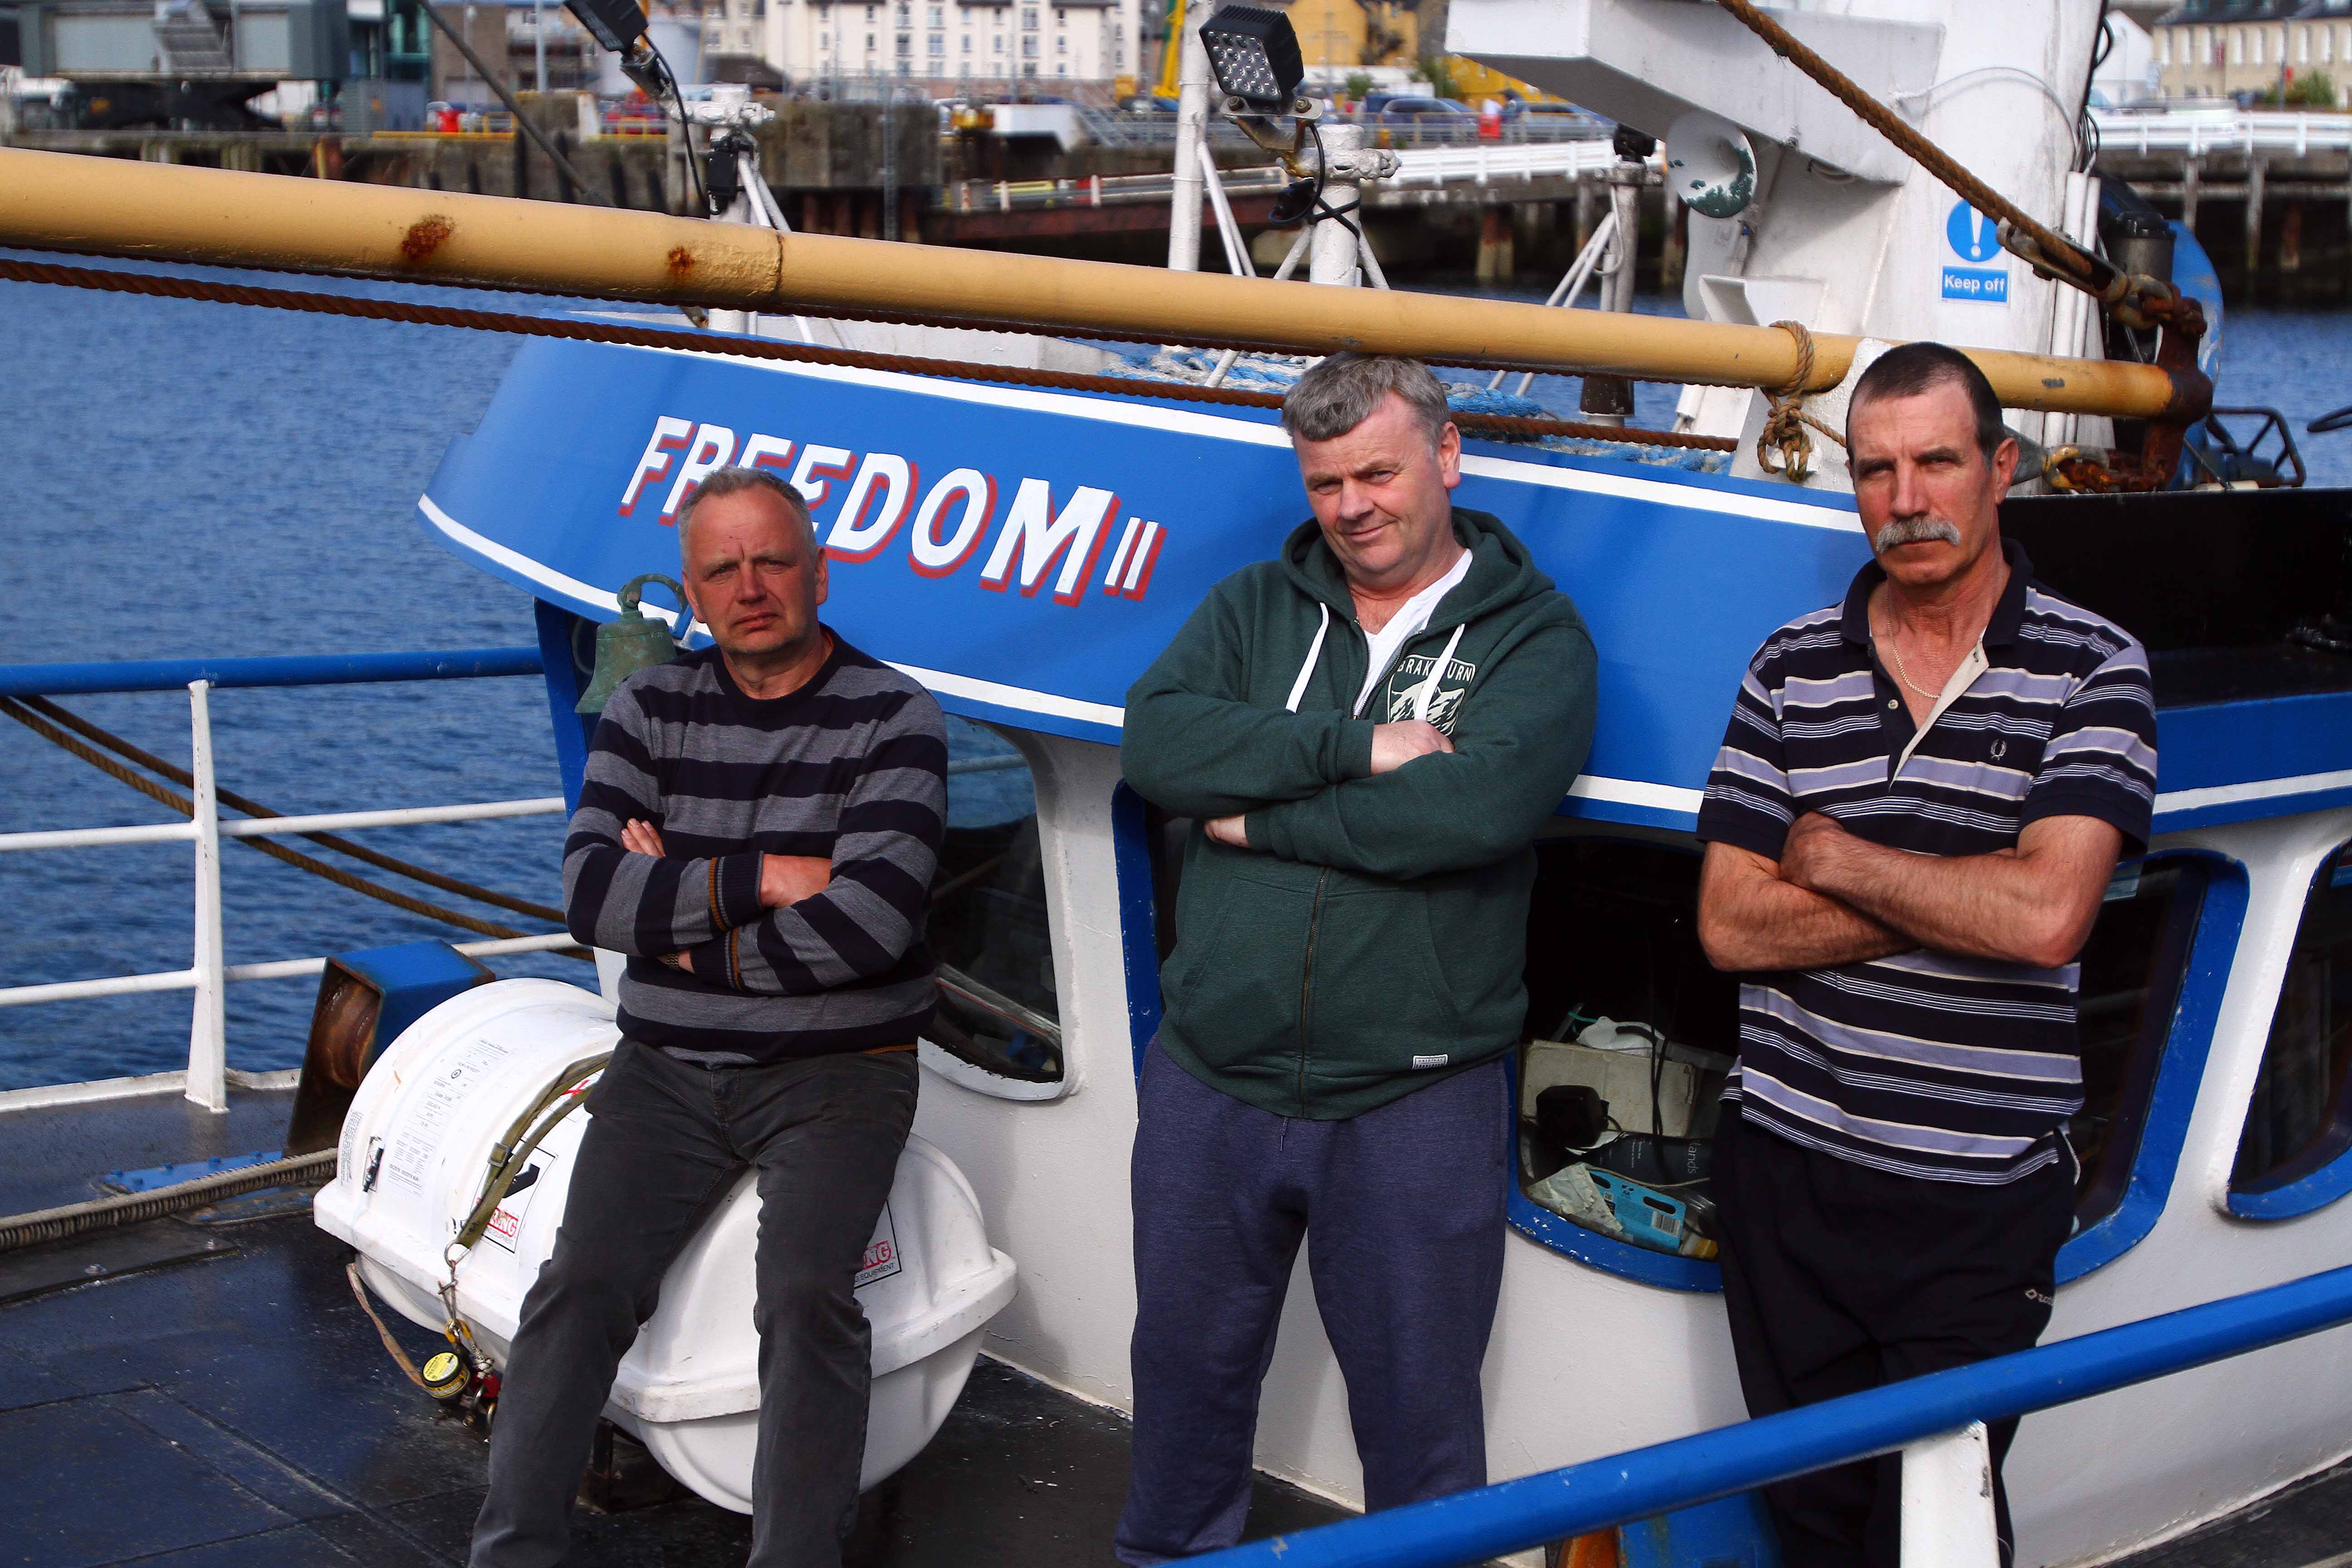 Angry skipper Jonathan MacAllister (centre) with latvian crewmen Guntis Hausmanis (right) and Janis Stals tied up aboard the Freedom losing money waiting for their crewman.